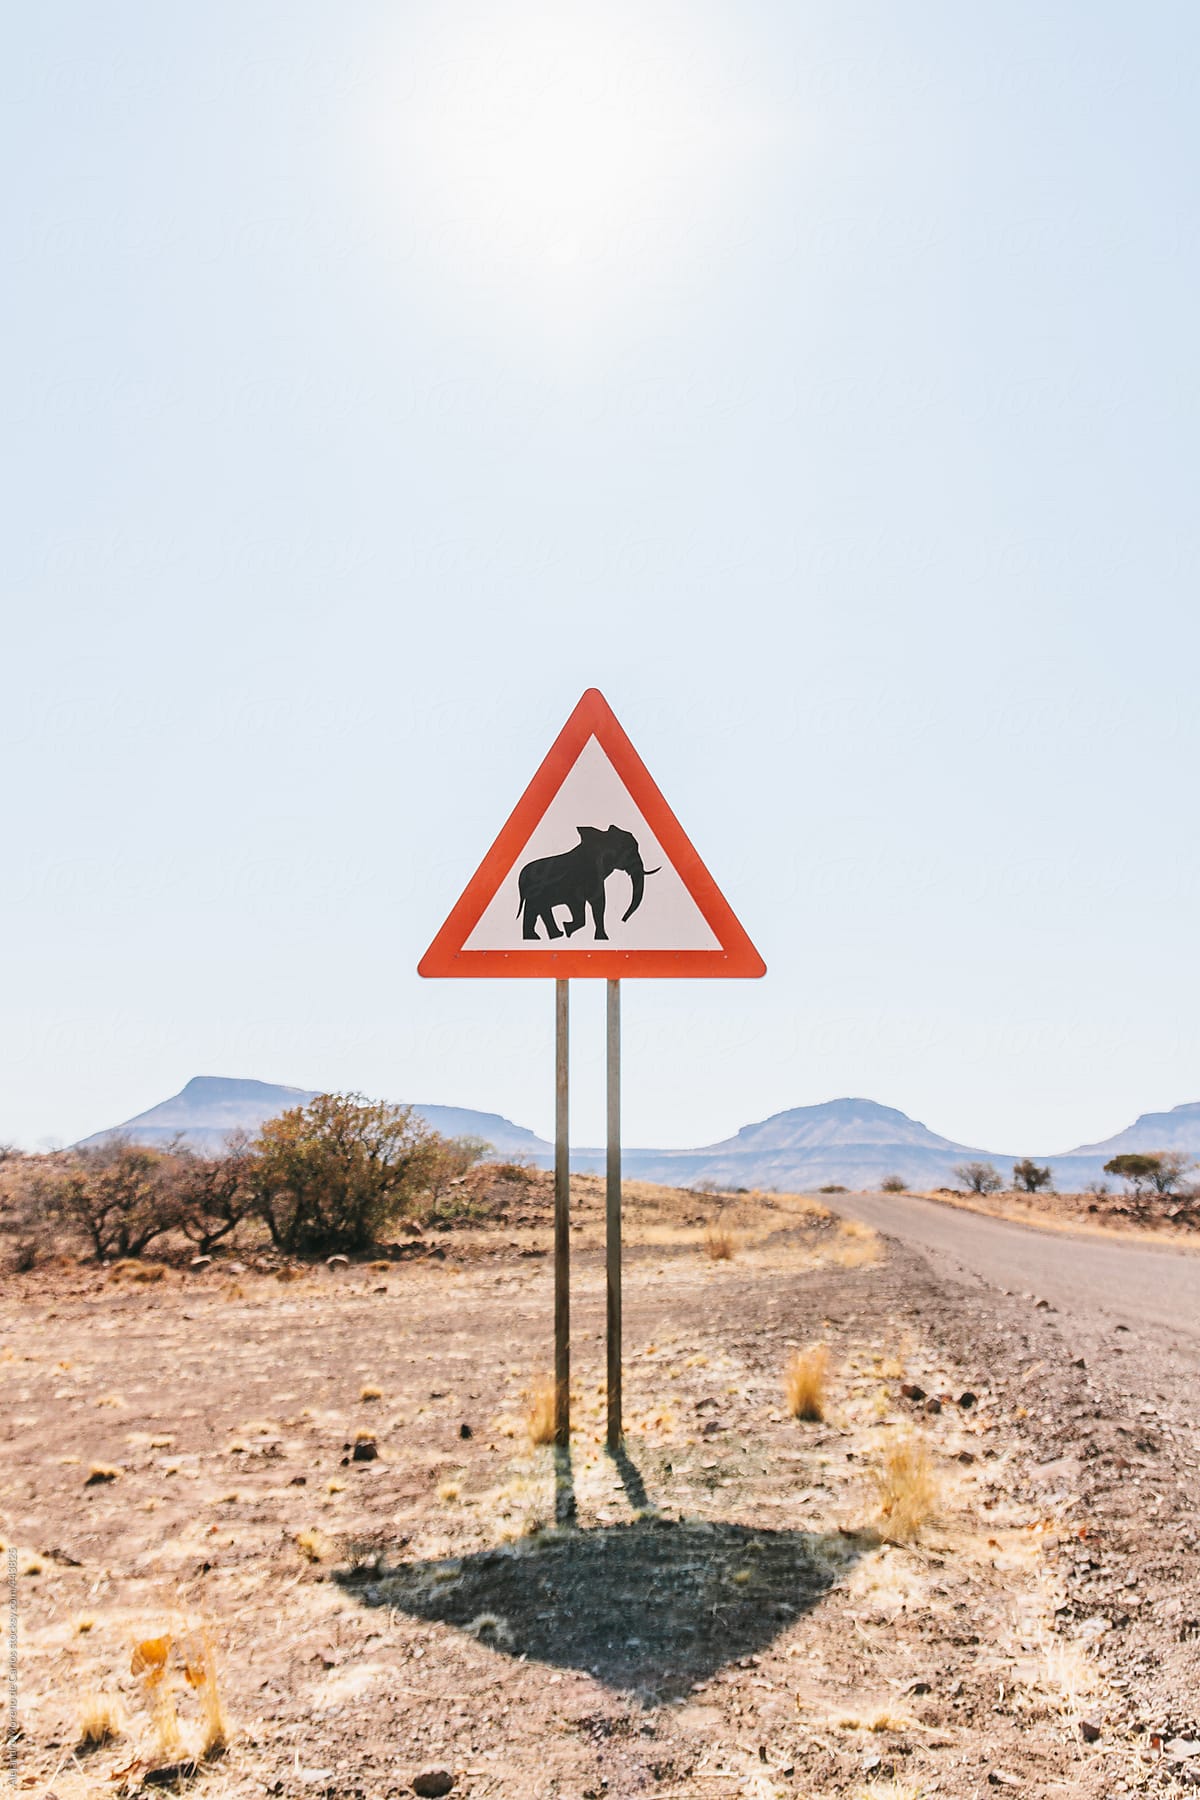 Elephants crossing warning sign in African road